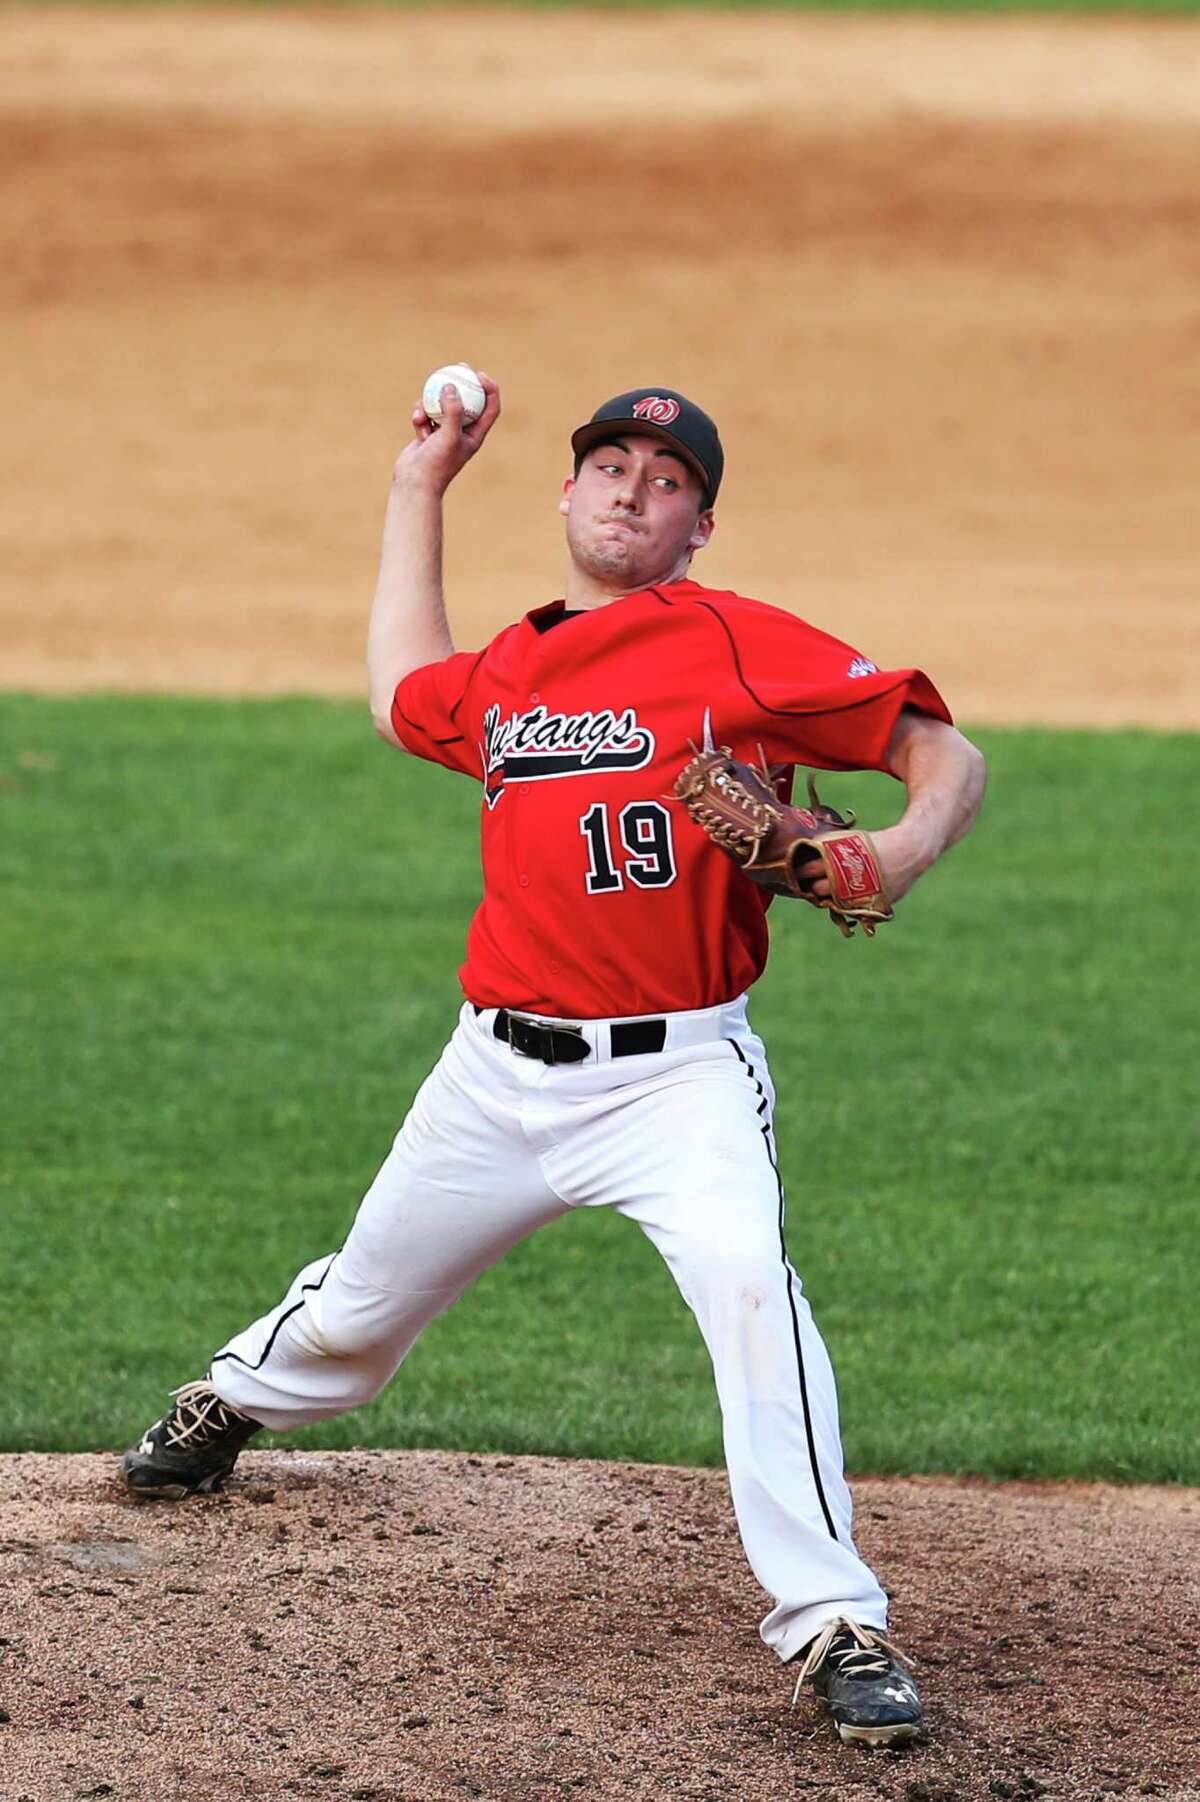 Fairfield Warde's pitcher #19 Nick Nardone delivers the pitch during Monday evenings match-up against Fairfield Ludlowe at Harbor Yard in Bridgeport.